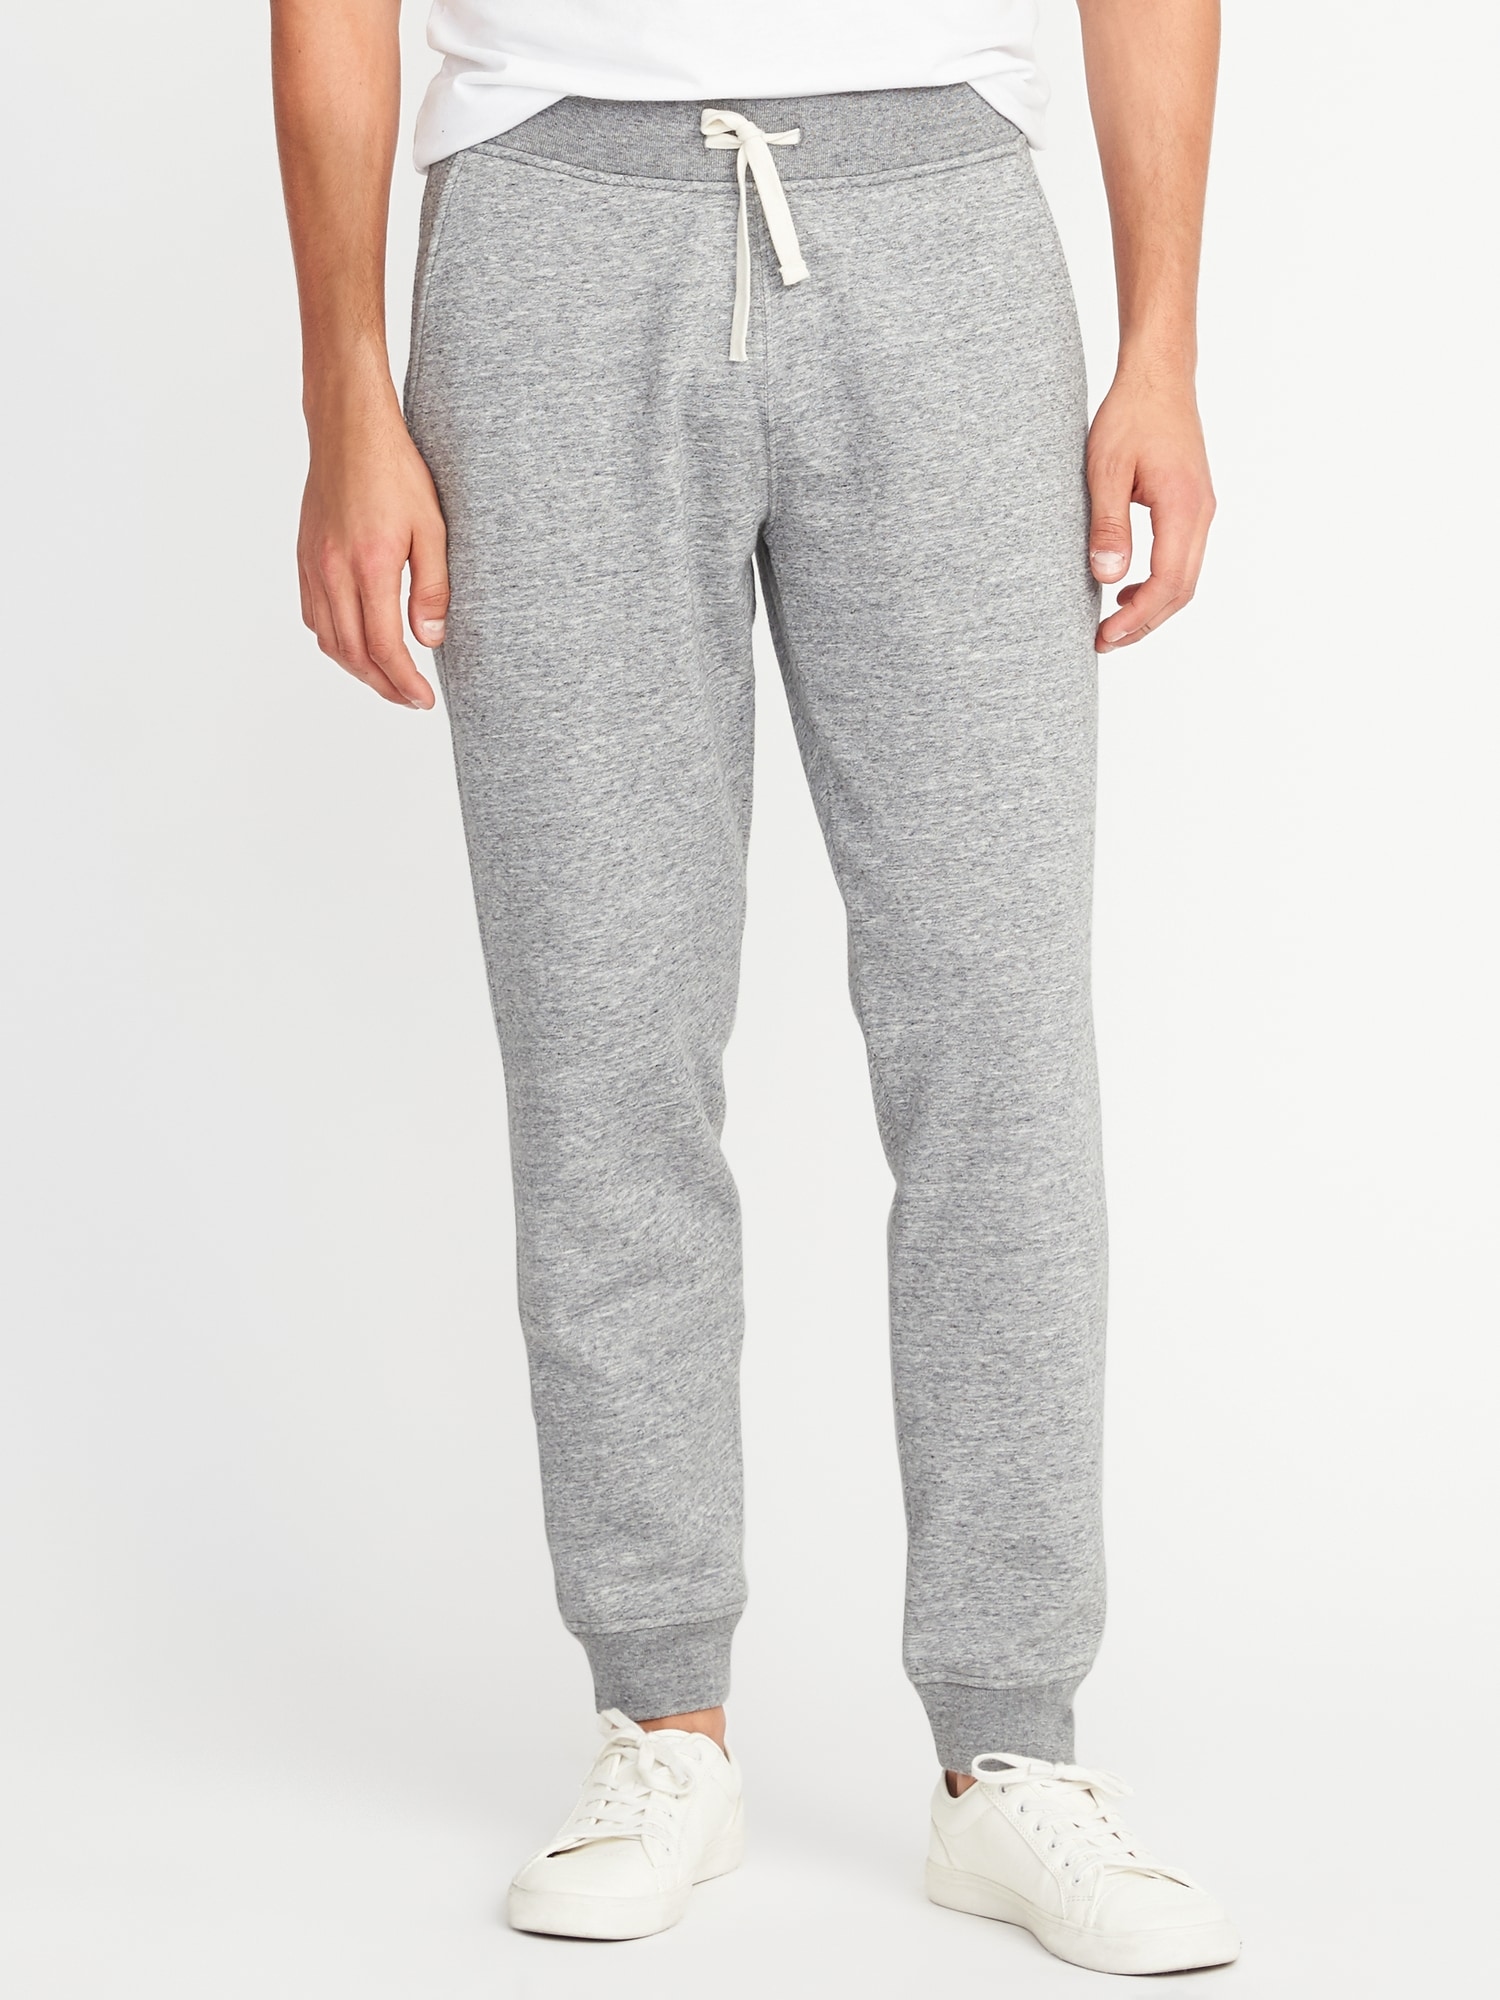 Old Navy Men's Tapered Street Jogger Sweatpants (Heather Gray in sizes S to XXXL)